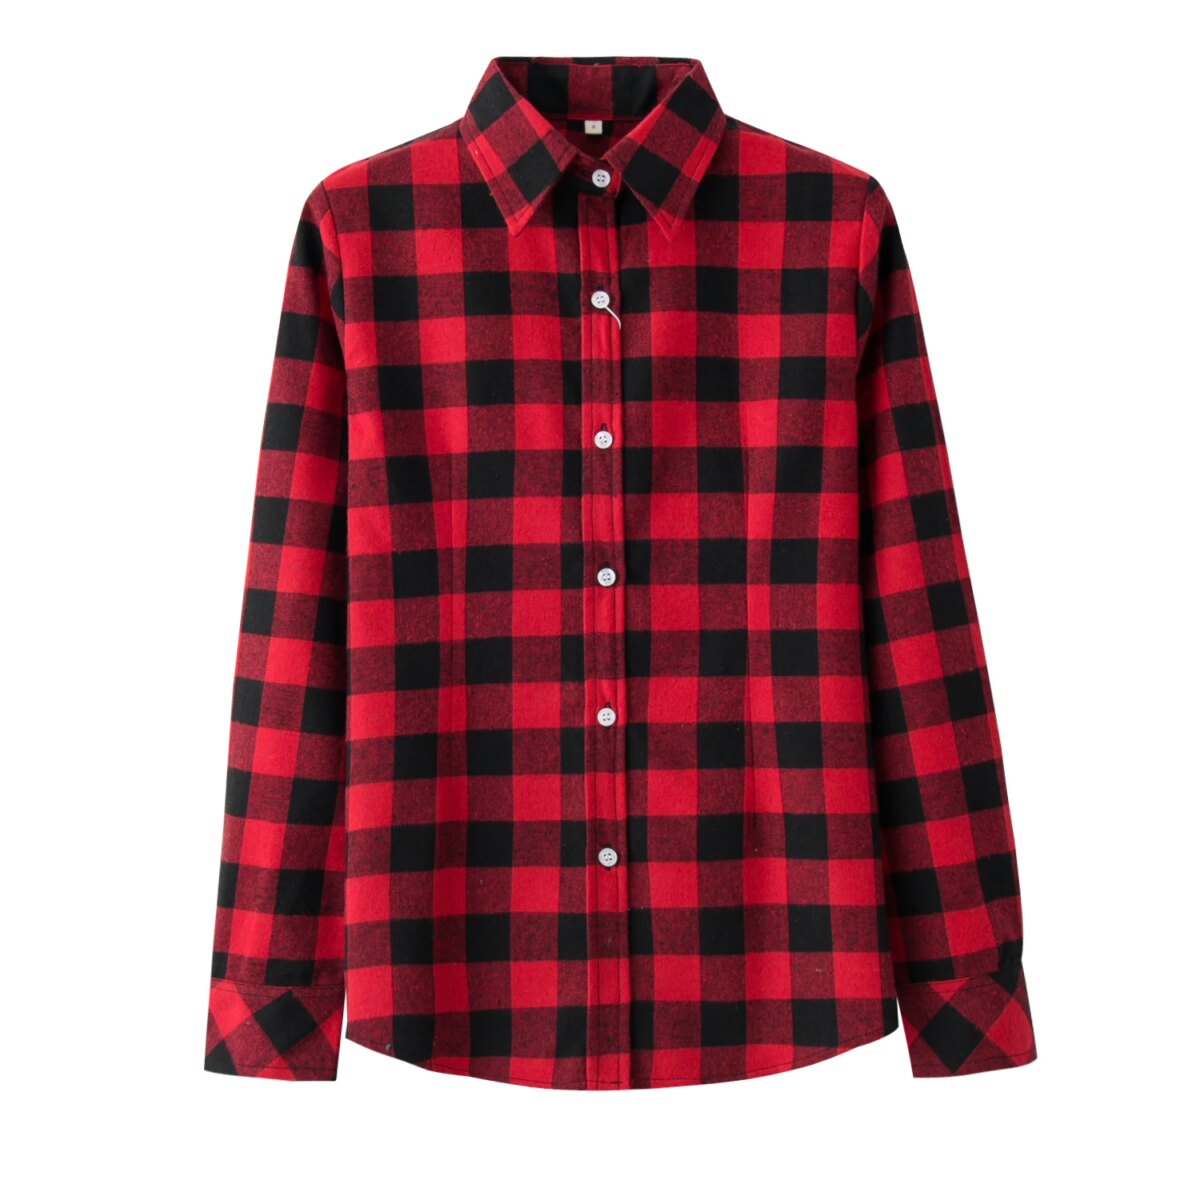 Chic Comfort: Flannel Shirt Blusas - Elevate Your Wardrobe with Lady Elegant Tops for Effortless Style and Comfort!